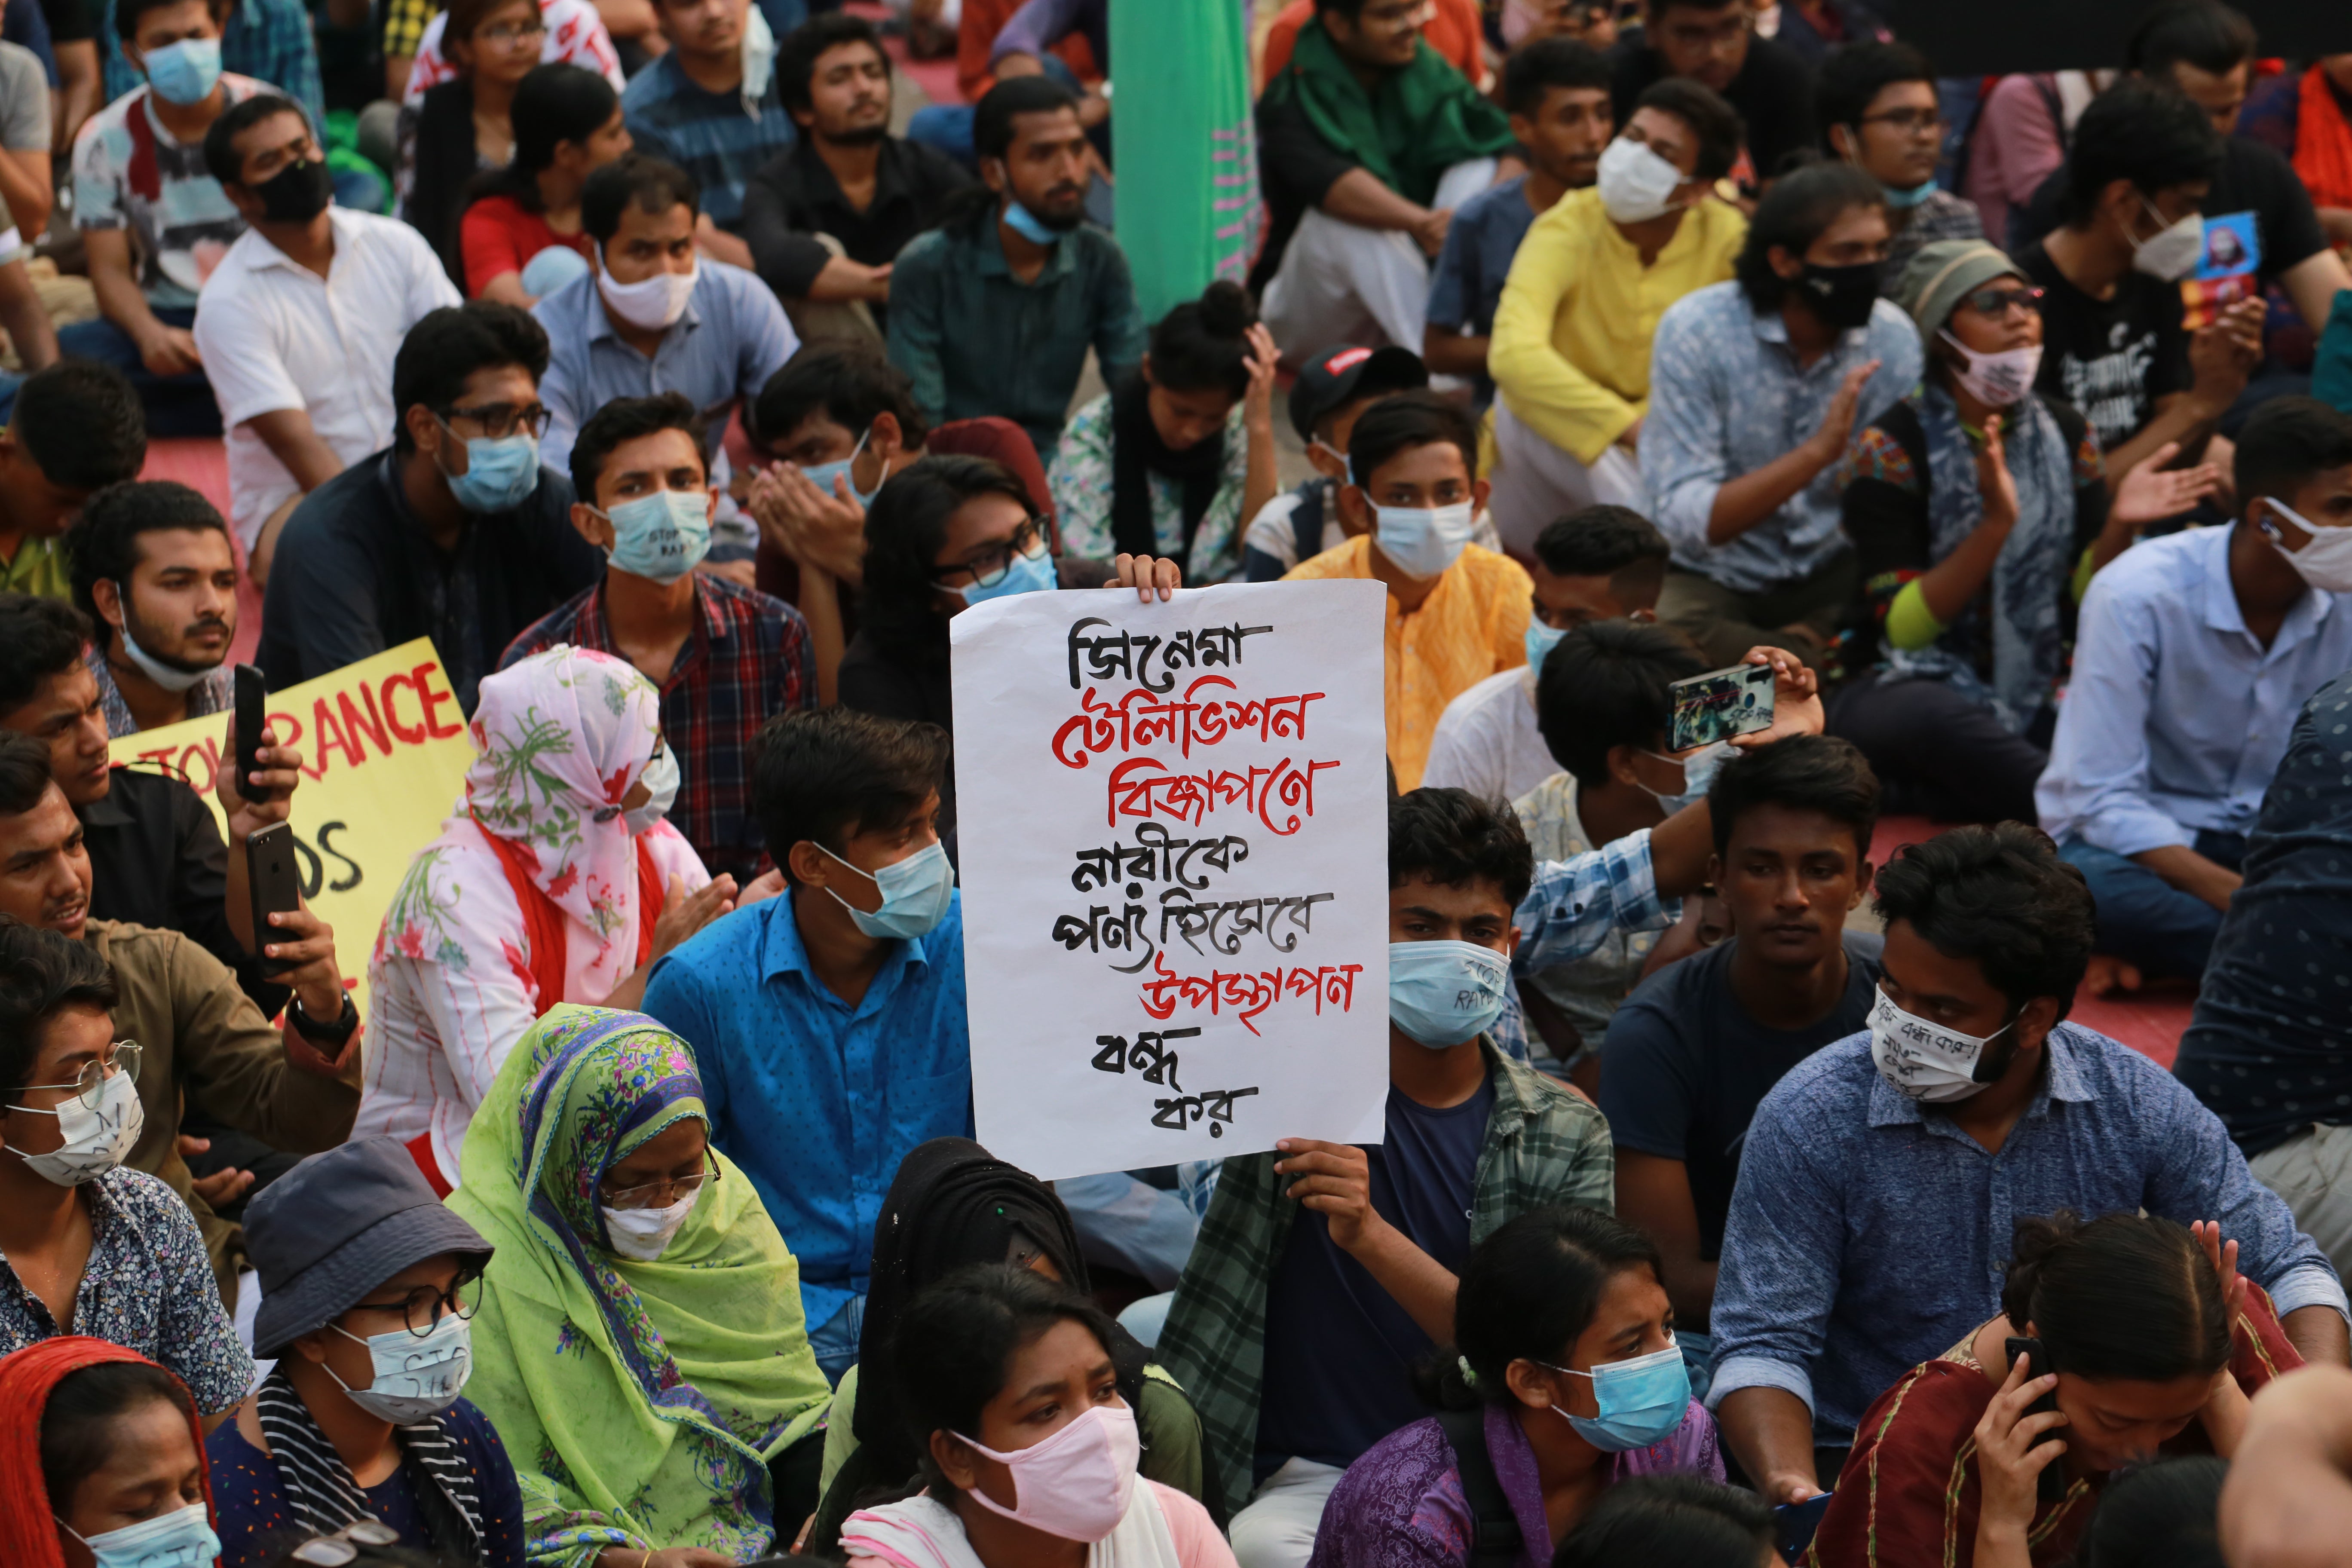 Crowds gather in Dhaka to protest against sexual abuse and rape